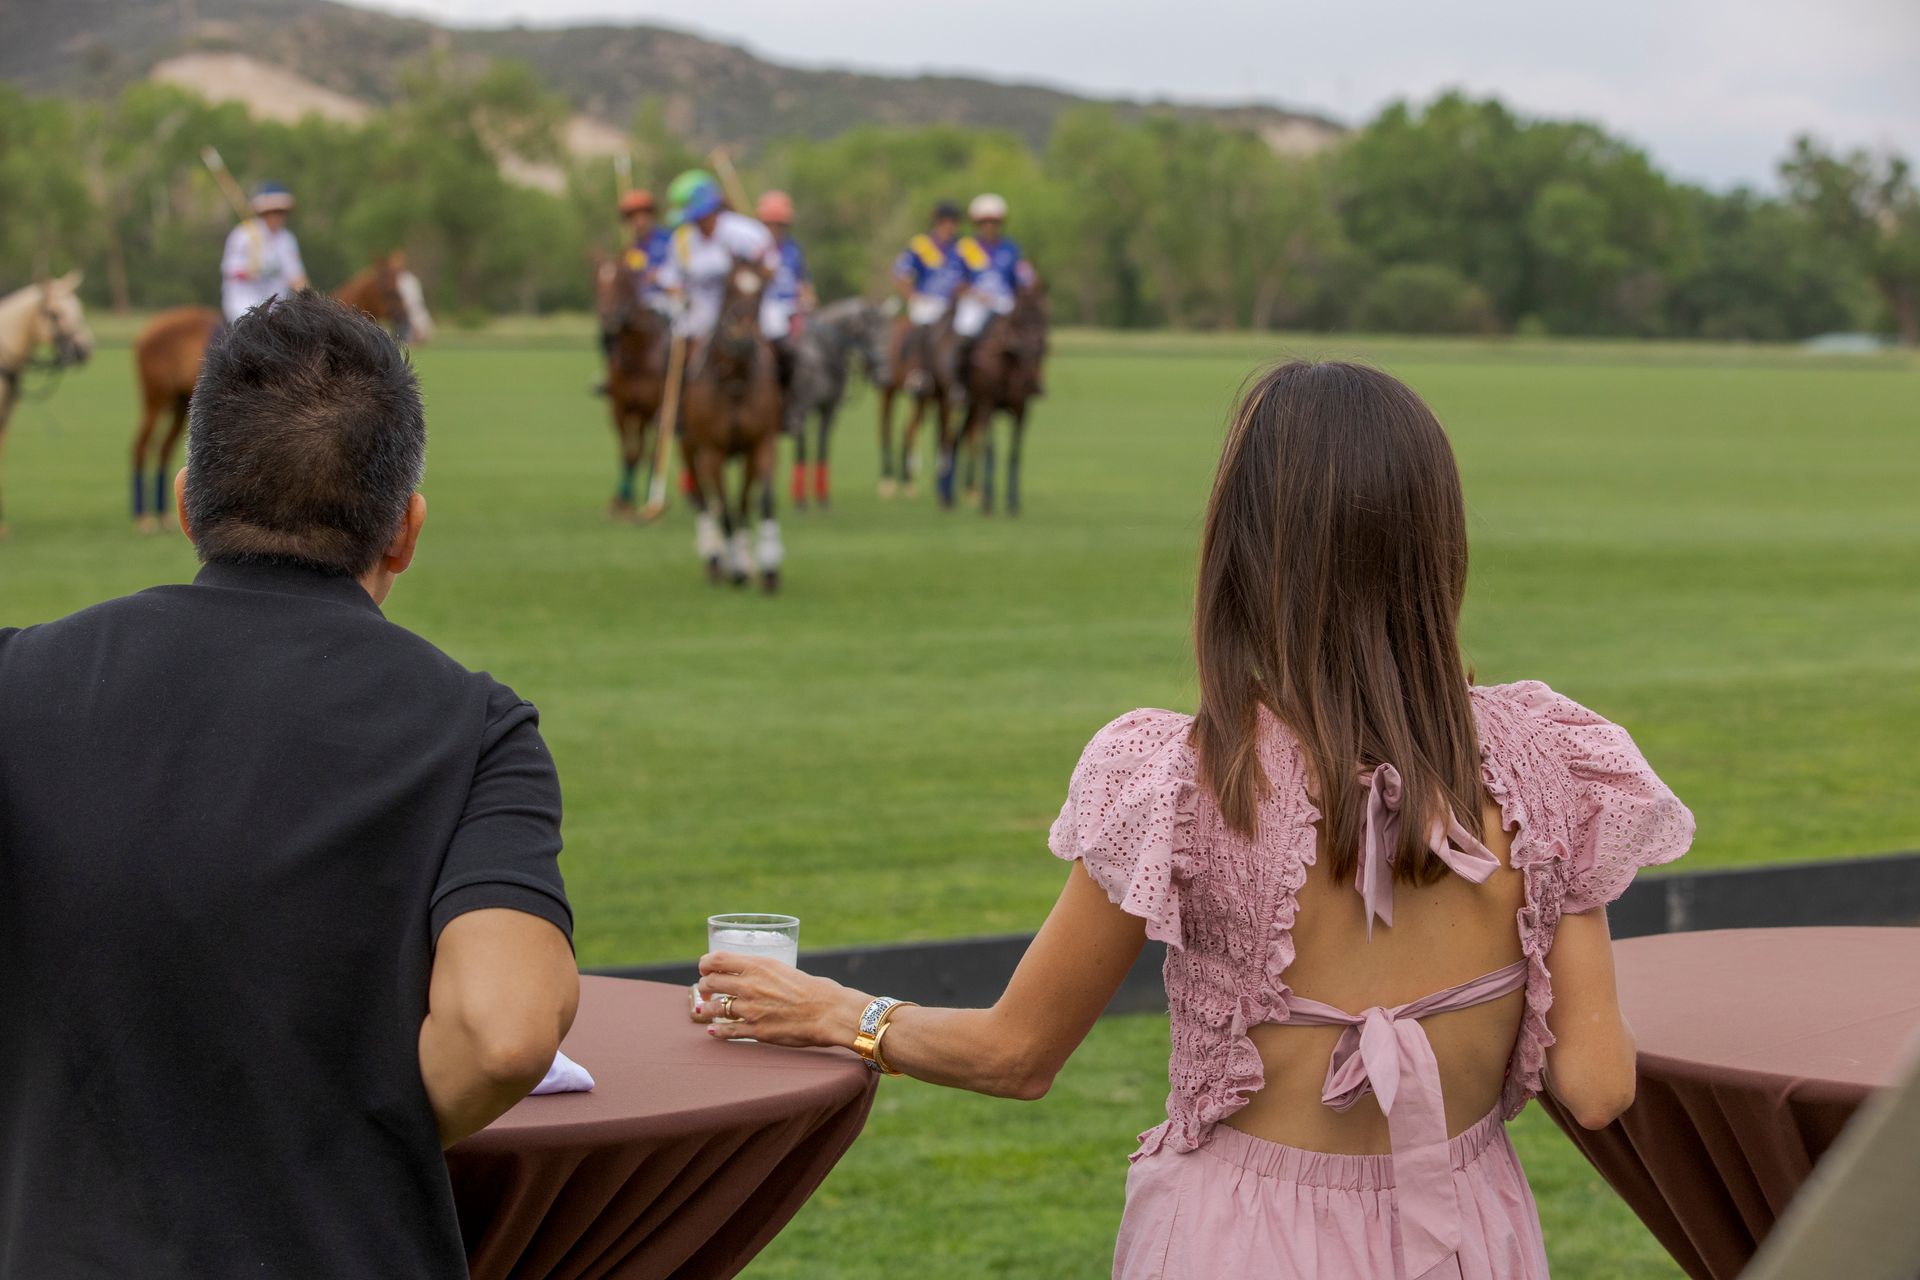 A man and a woman are watching a polo match on a field.